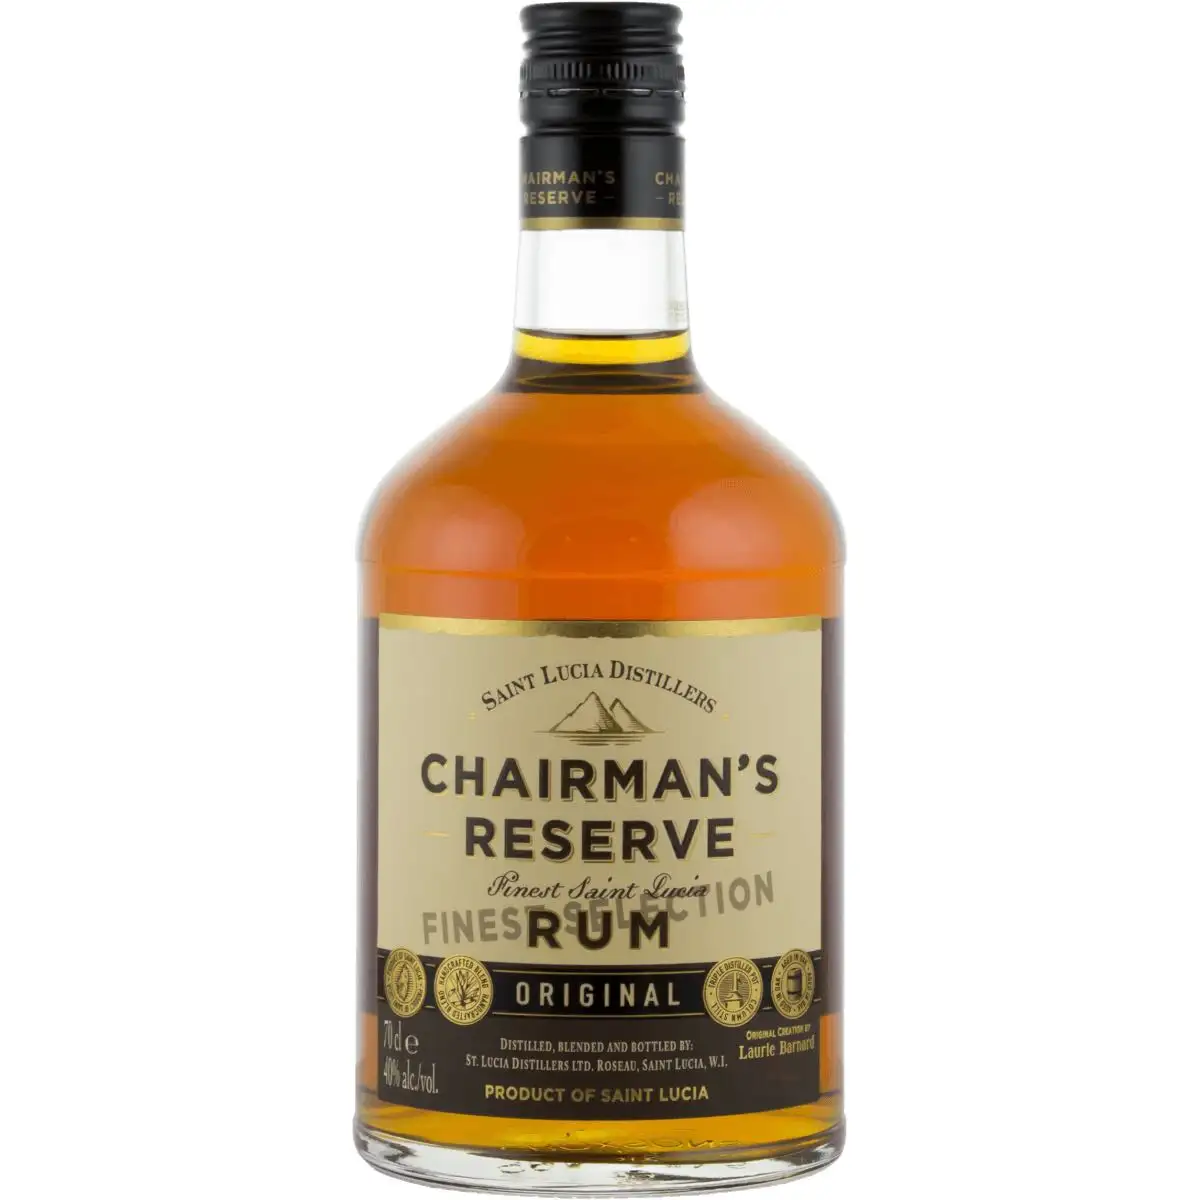 Image of the front of the bottle of the rum Chairman‘s Reserve Original